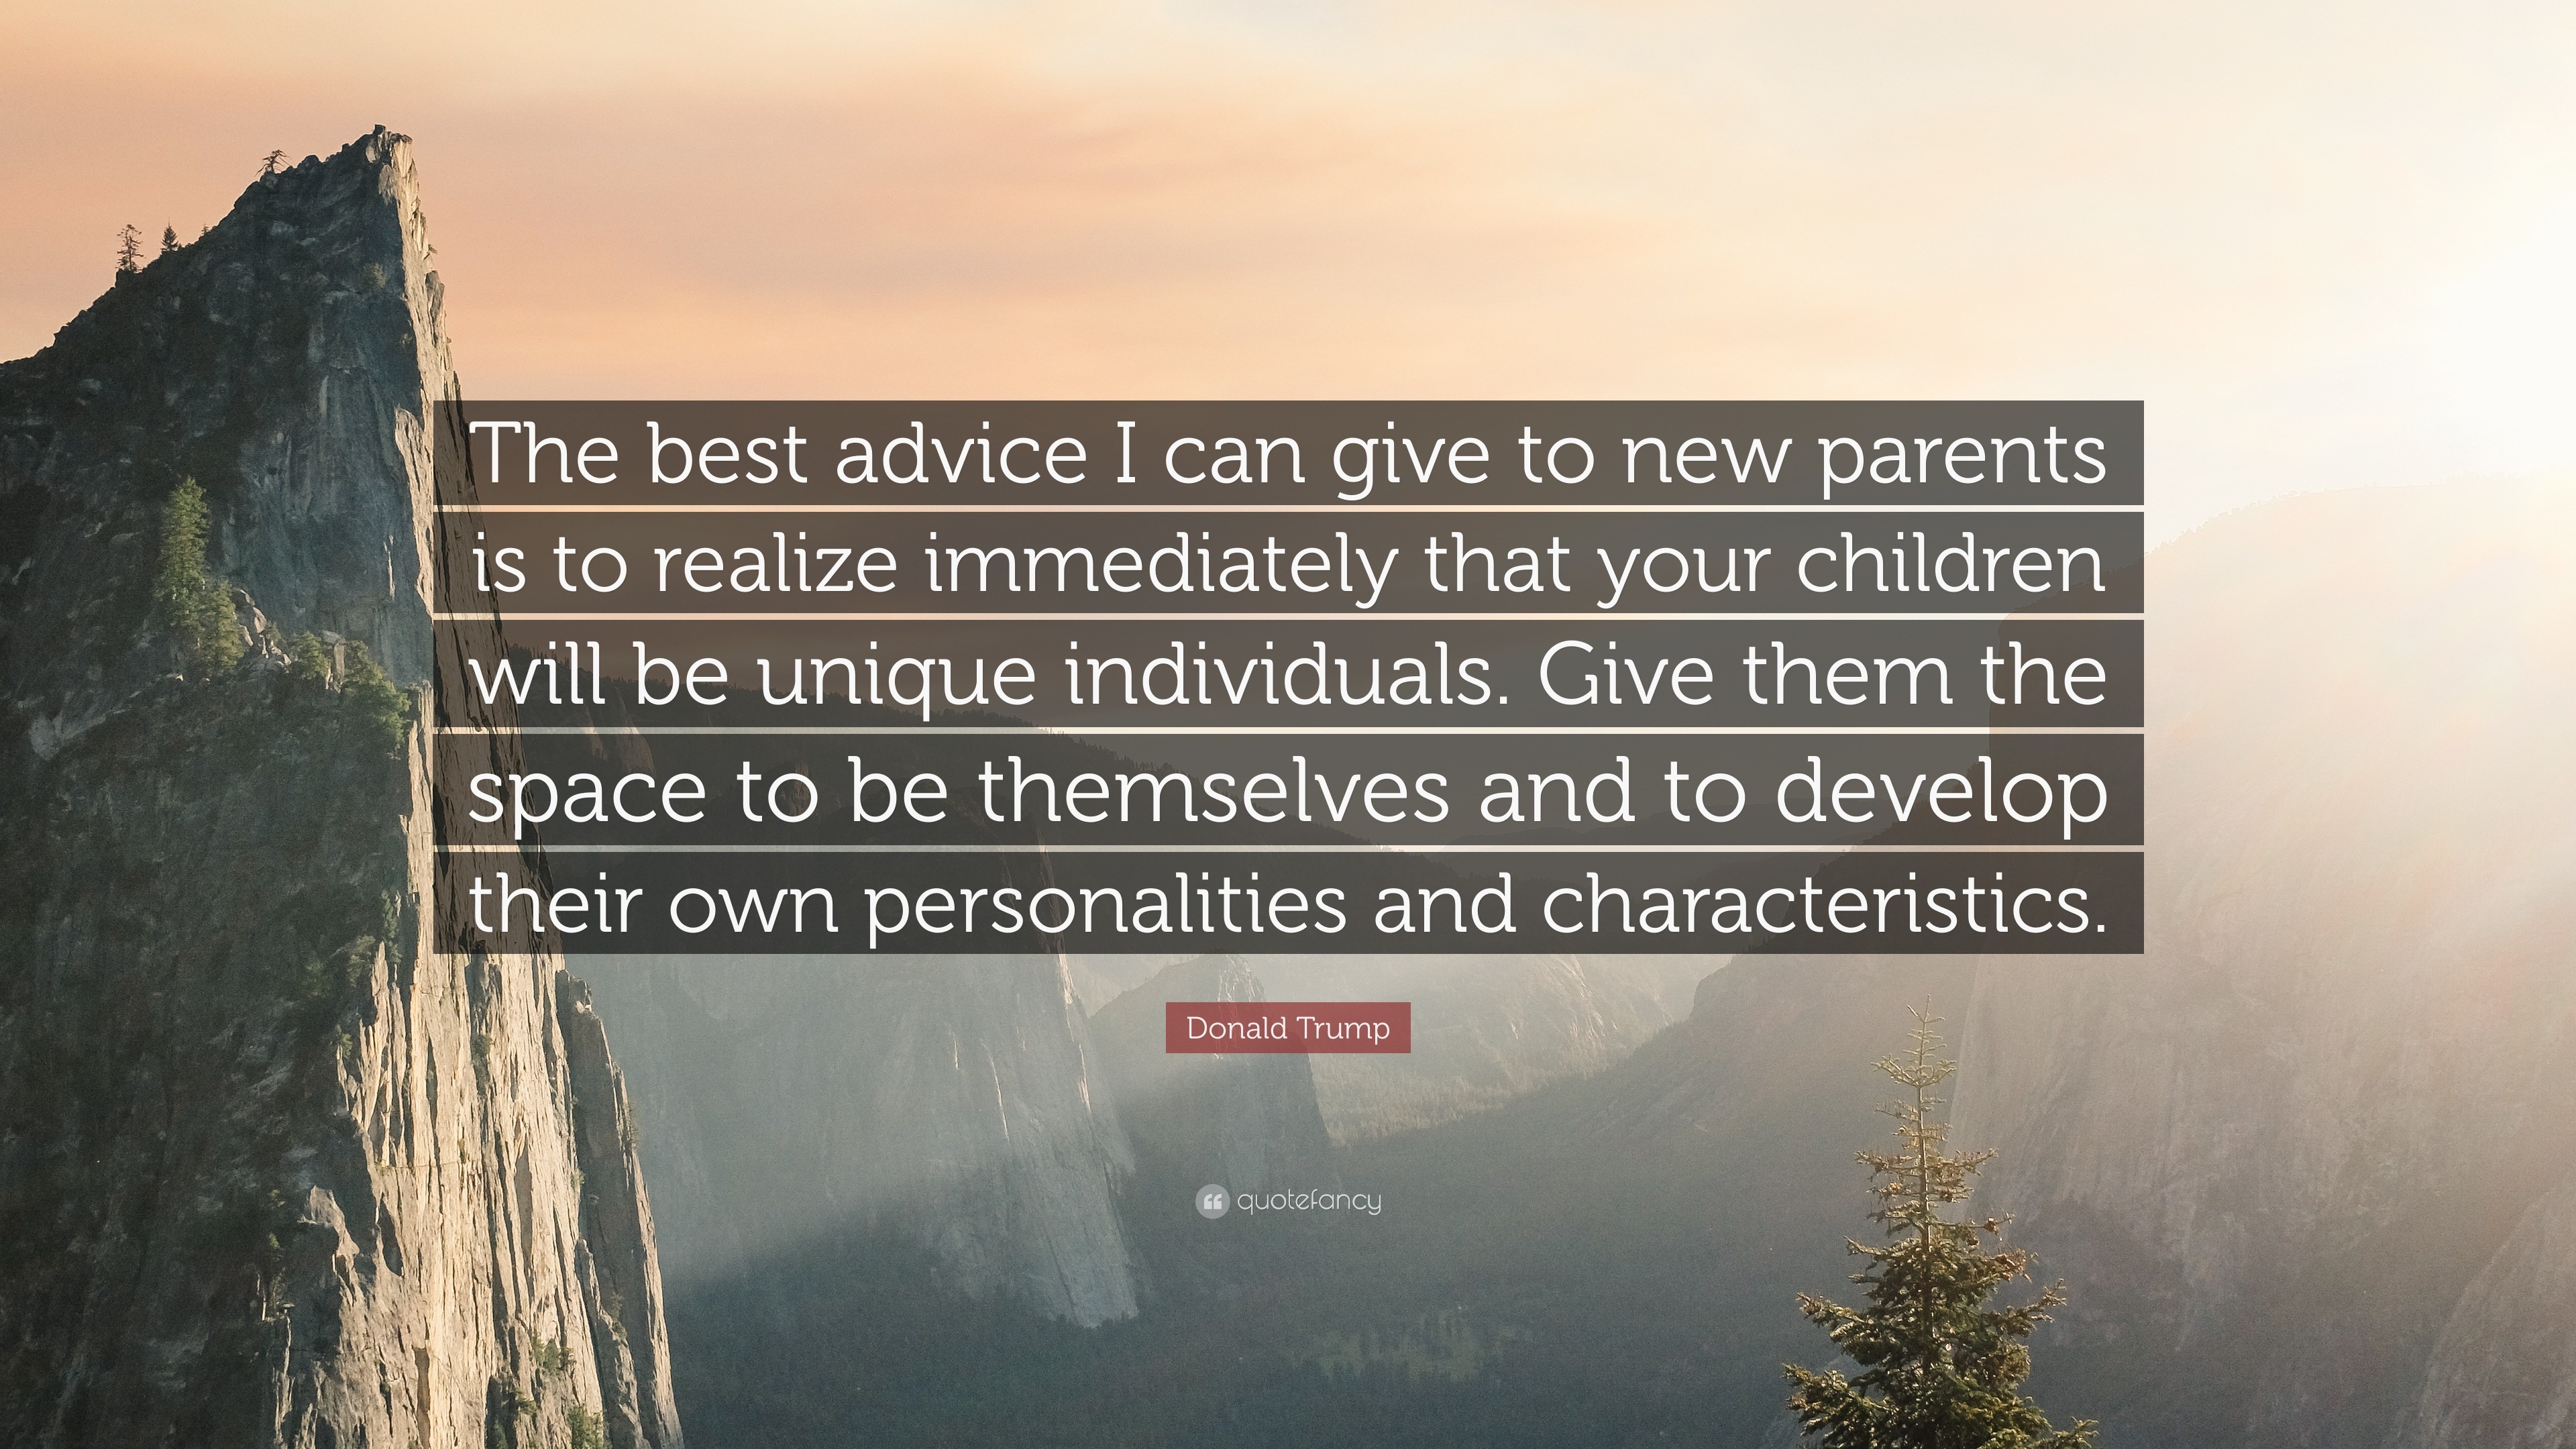 Donald Trump Quote: “The best advice I can give to new parents is to  realize immediately that your children will be unique individuals. Give ”